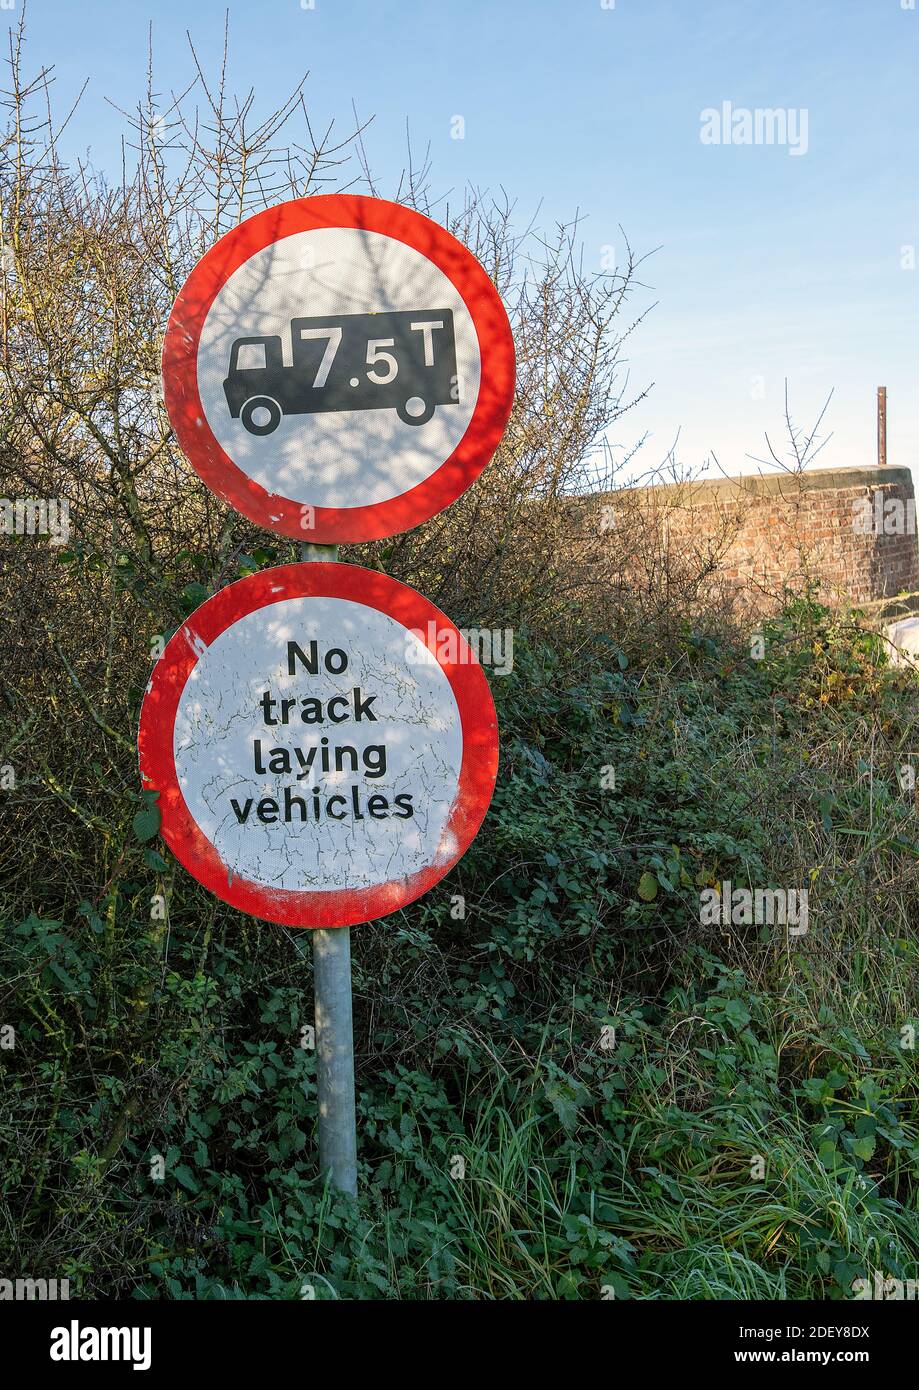 Warning signs for a 7.5 ton limit and no track laying vehicles on approce to a weak bridge Stock Photo